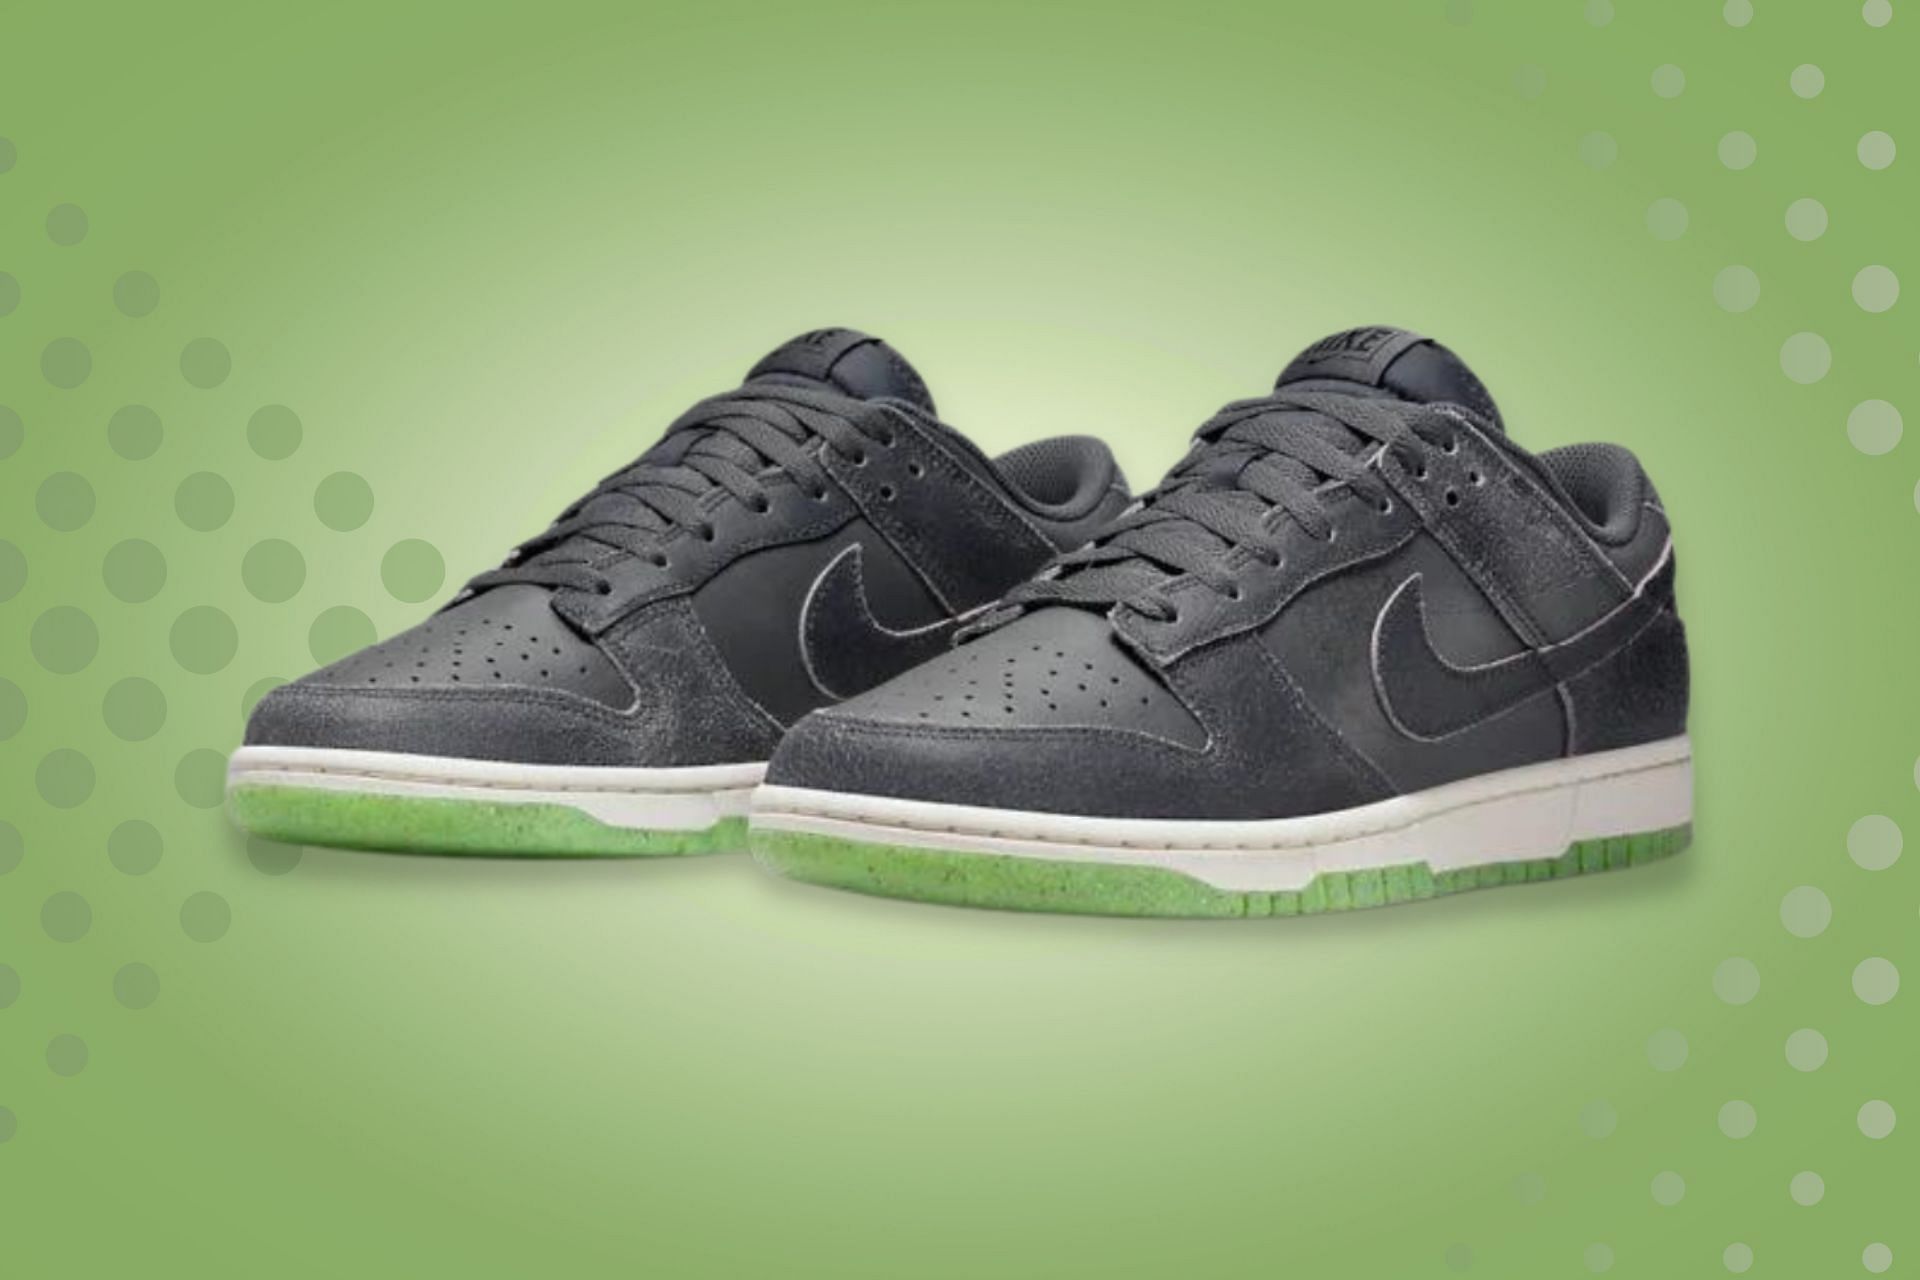 Where to buy Nike Dunk Low “Halloween” shoes? Price, release date, and more details explored